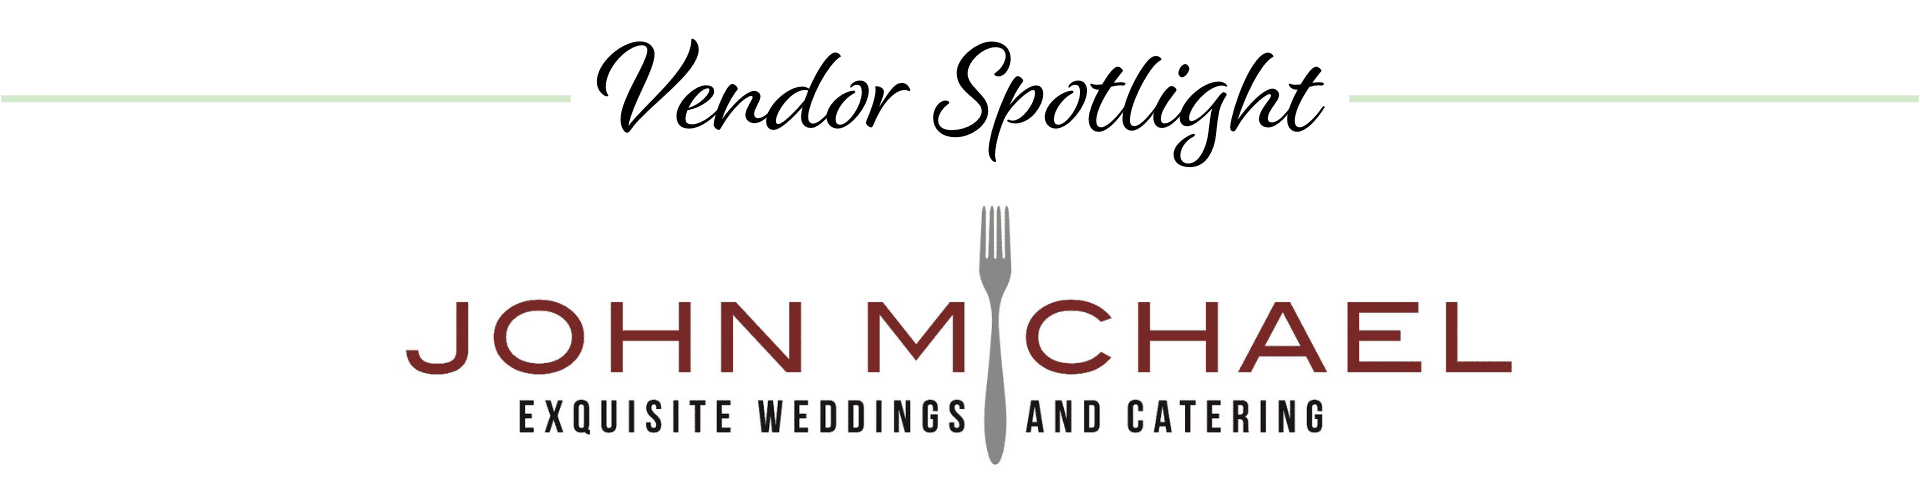 John Michael Exquisite Weddings and Catering logo